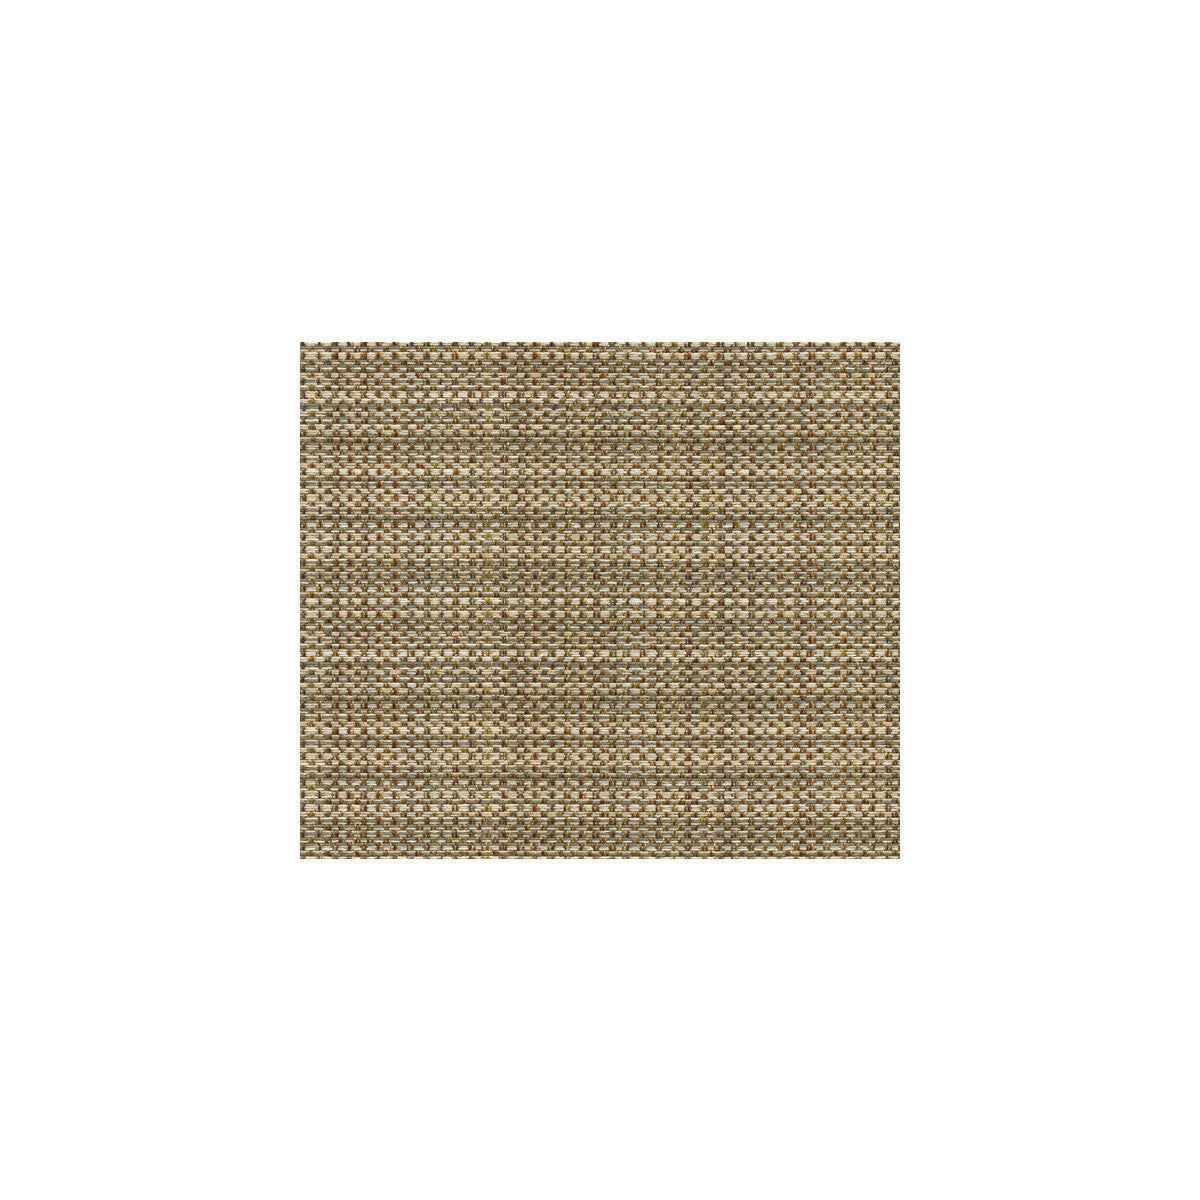 Alegria fabric in earth color - pattern 32513.616.0 - by Kravet Design in the Jonathan Adler Utopia collection